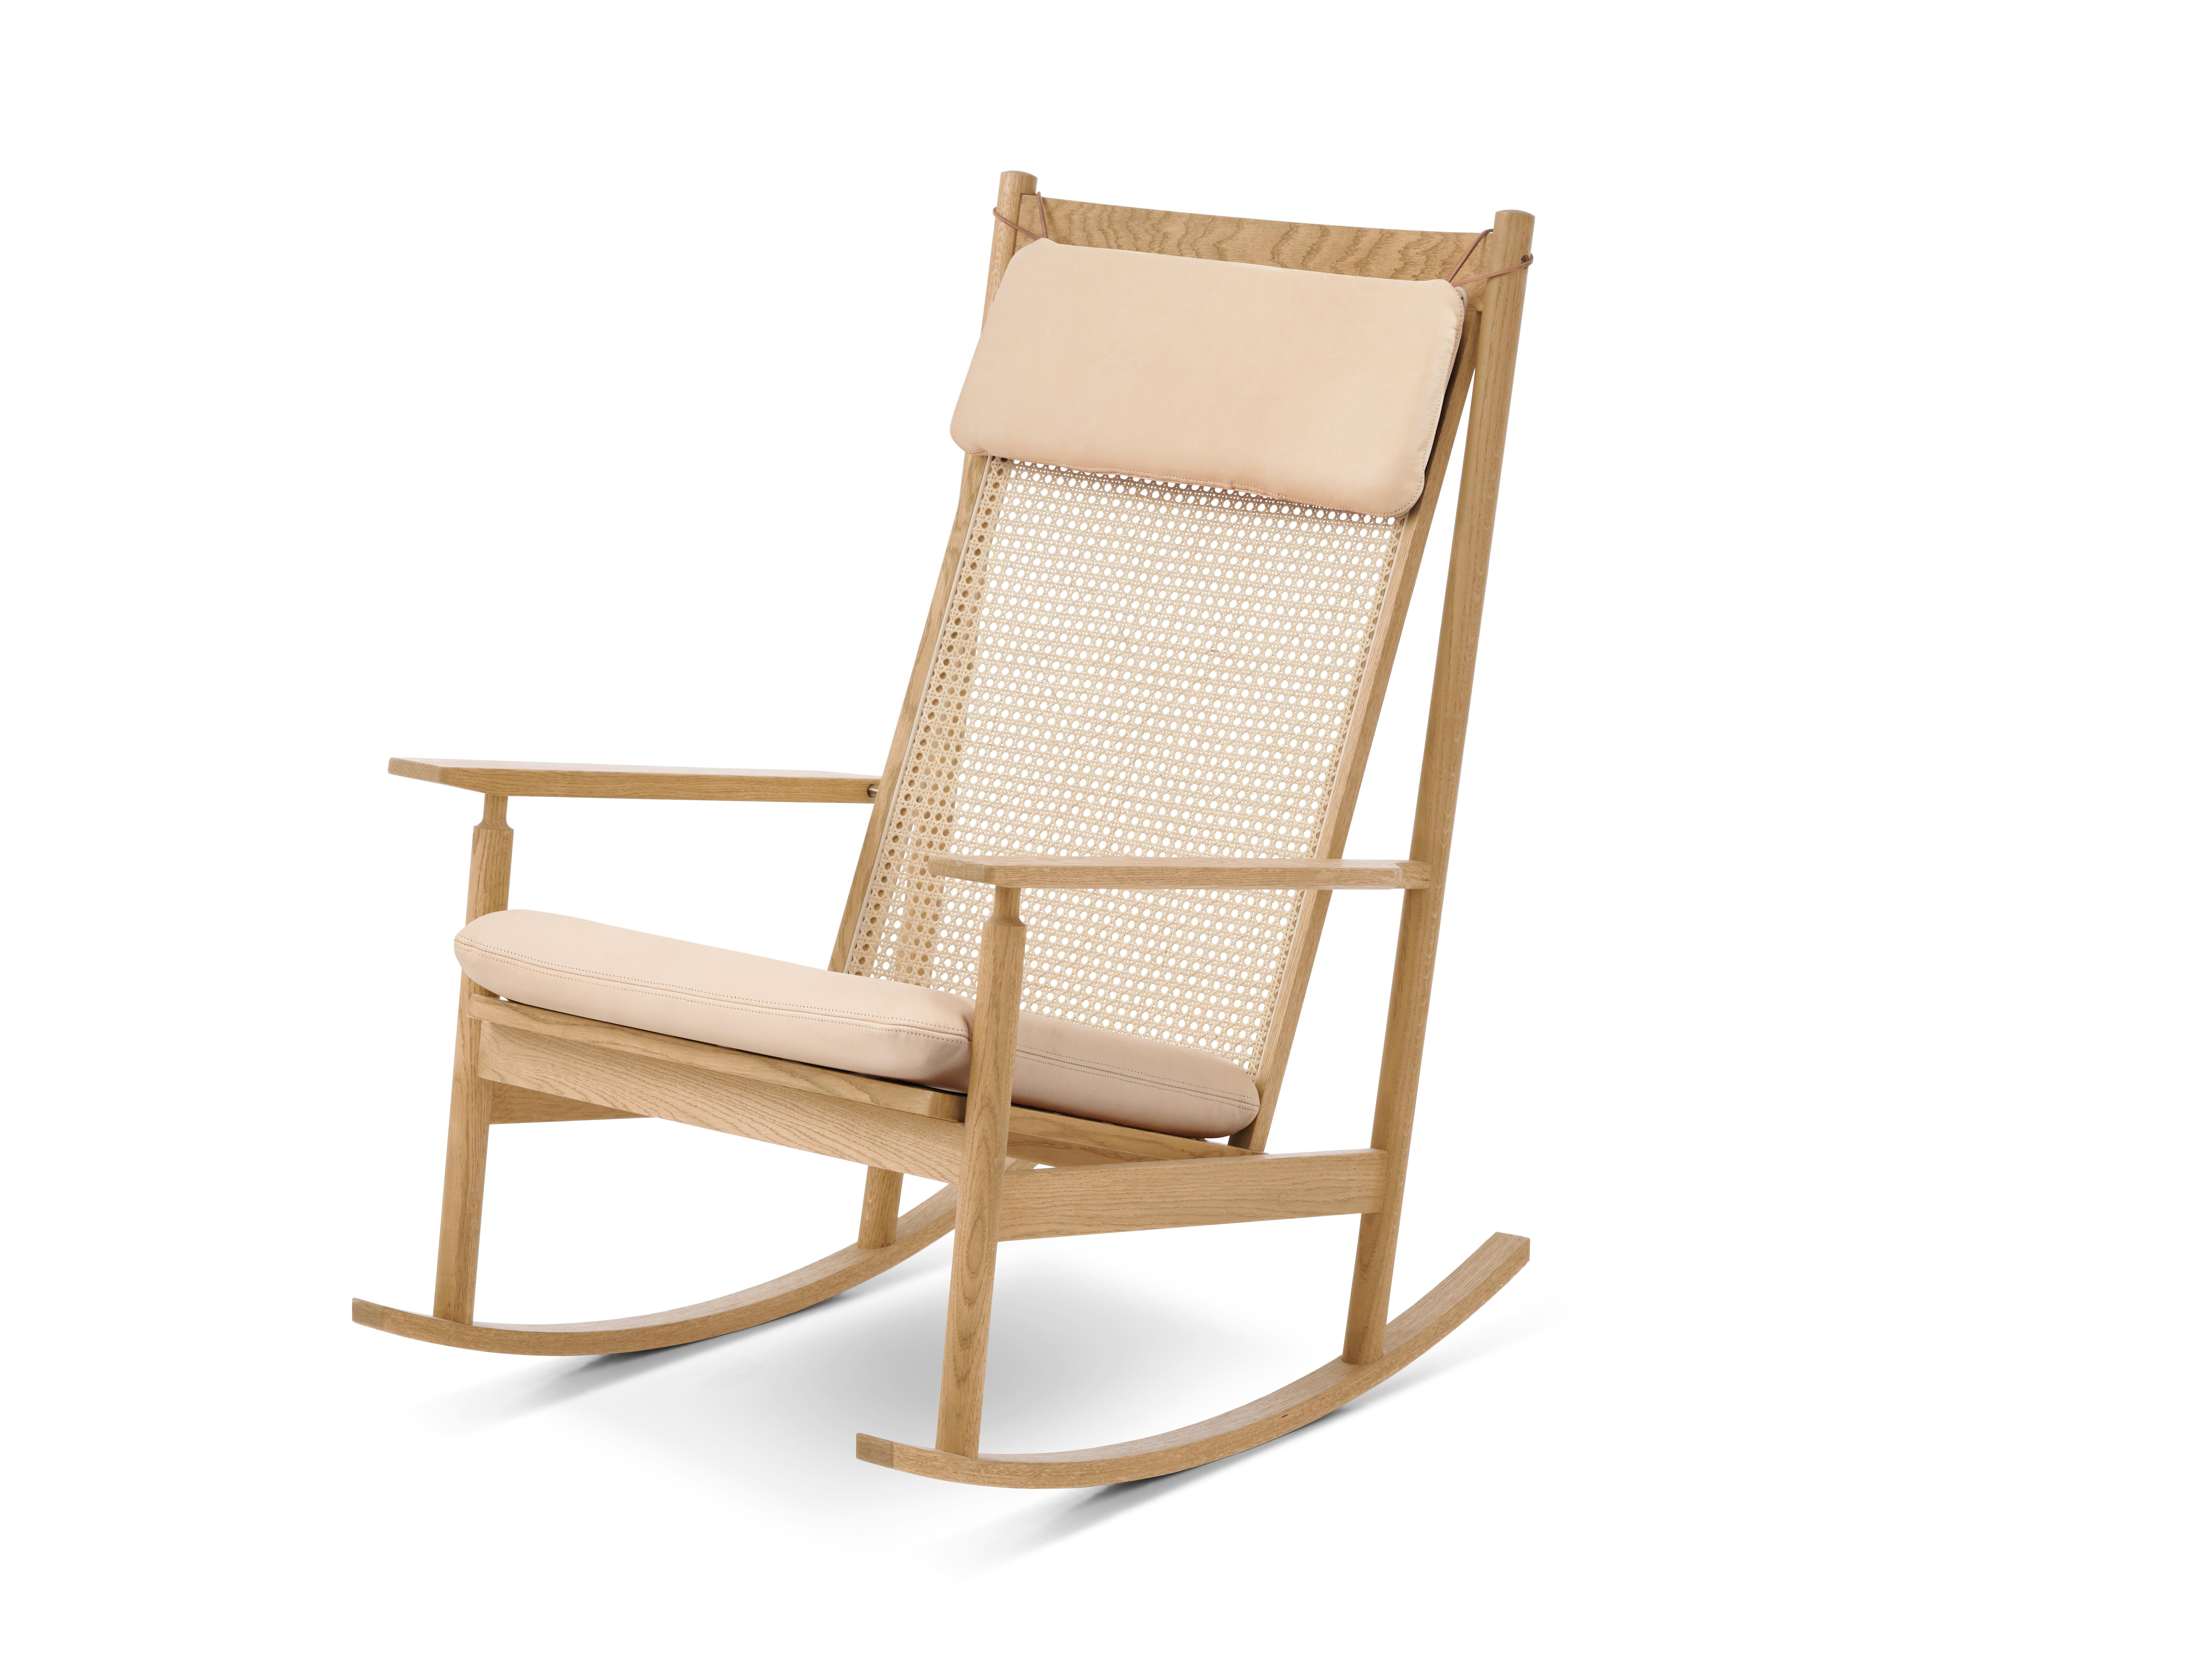 The Classic swing rocking chair was designed in 1956 by the architect Hans Olsen, who conducted extensive experiments in his quest to come up with original furniture designs. The chair, also known as Model 532a, was originally produced by the Danish